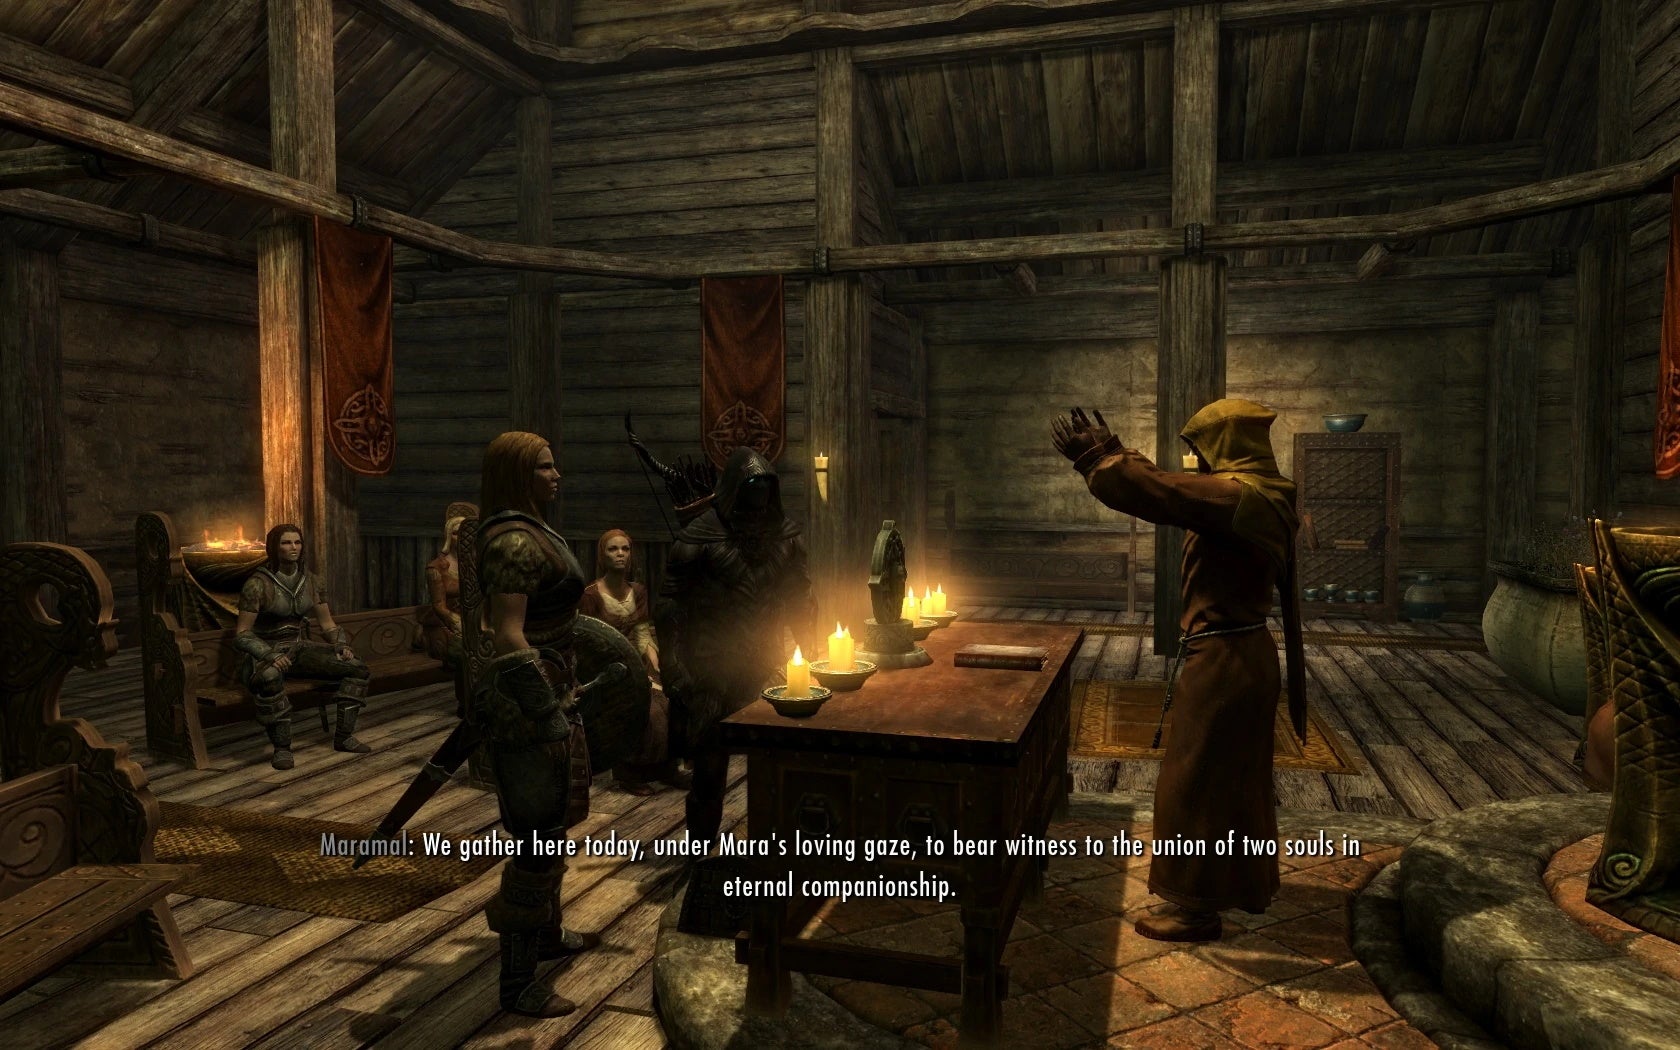 Image for How to get married in Skyrim, Romance options, and where to find the Amulet of Mara